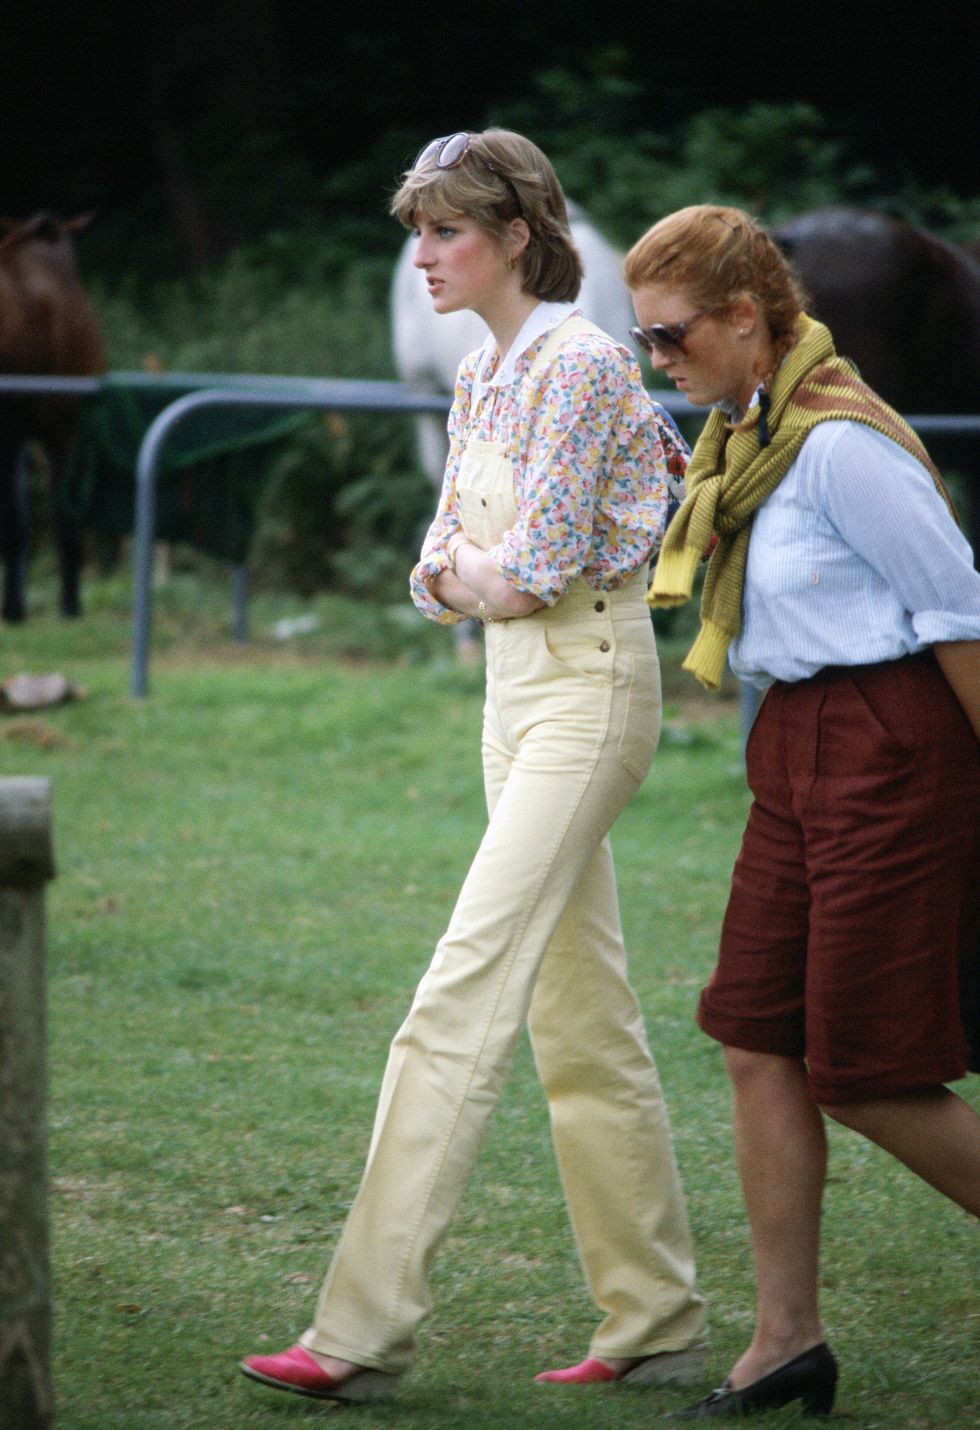 cowdray park, united kingdom   july 12  lady diana spencer and sarah ferguson talking together at a polo matchin the 1980s before either married a royal prince  photo by tim graham photo library via getty images